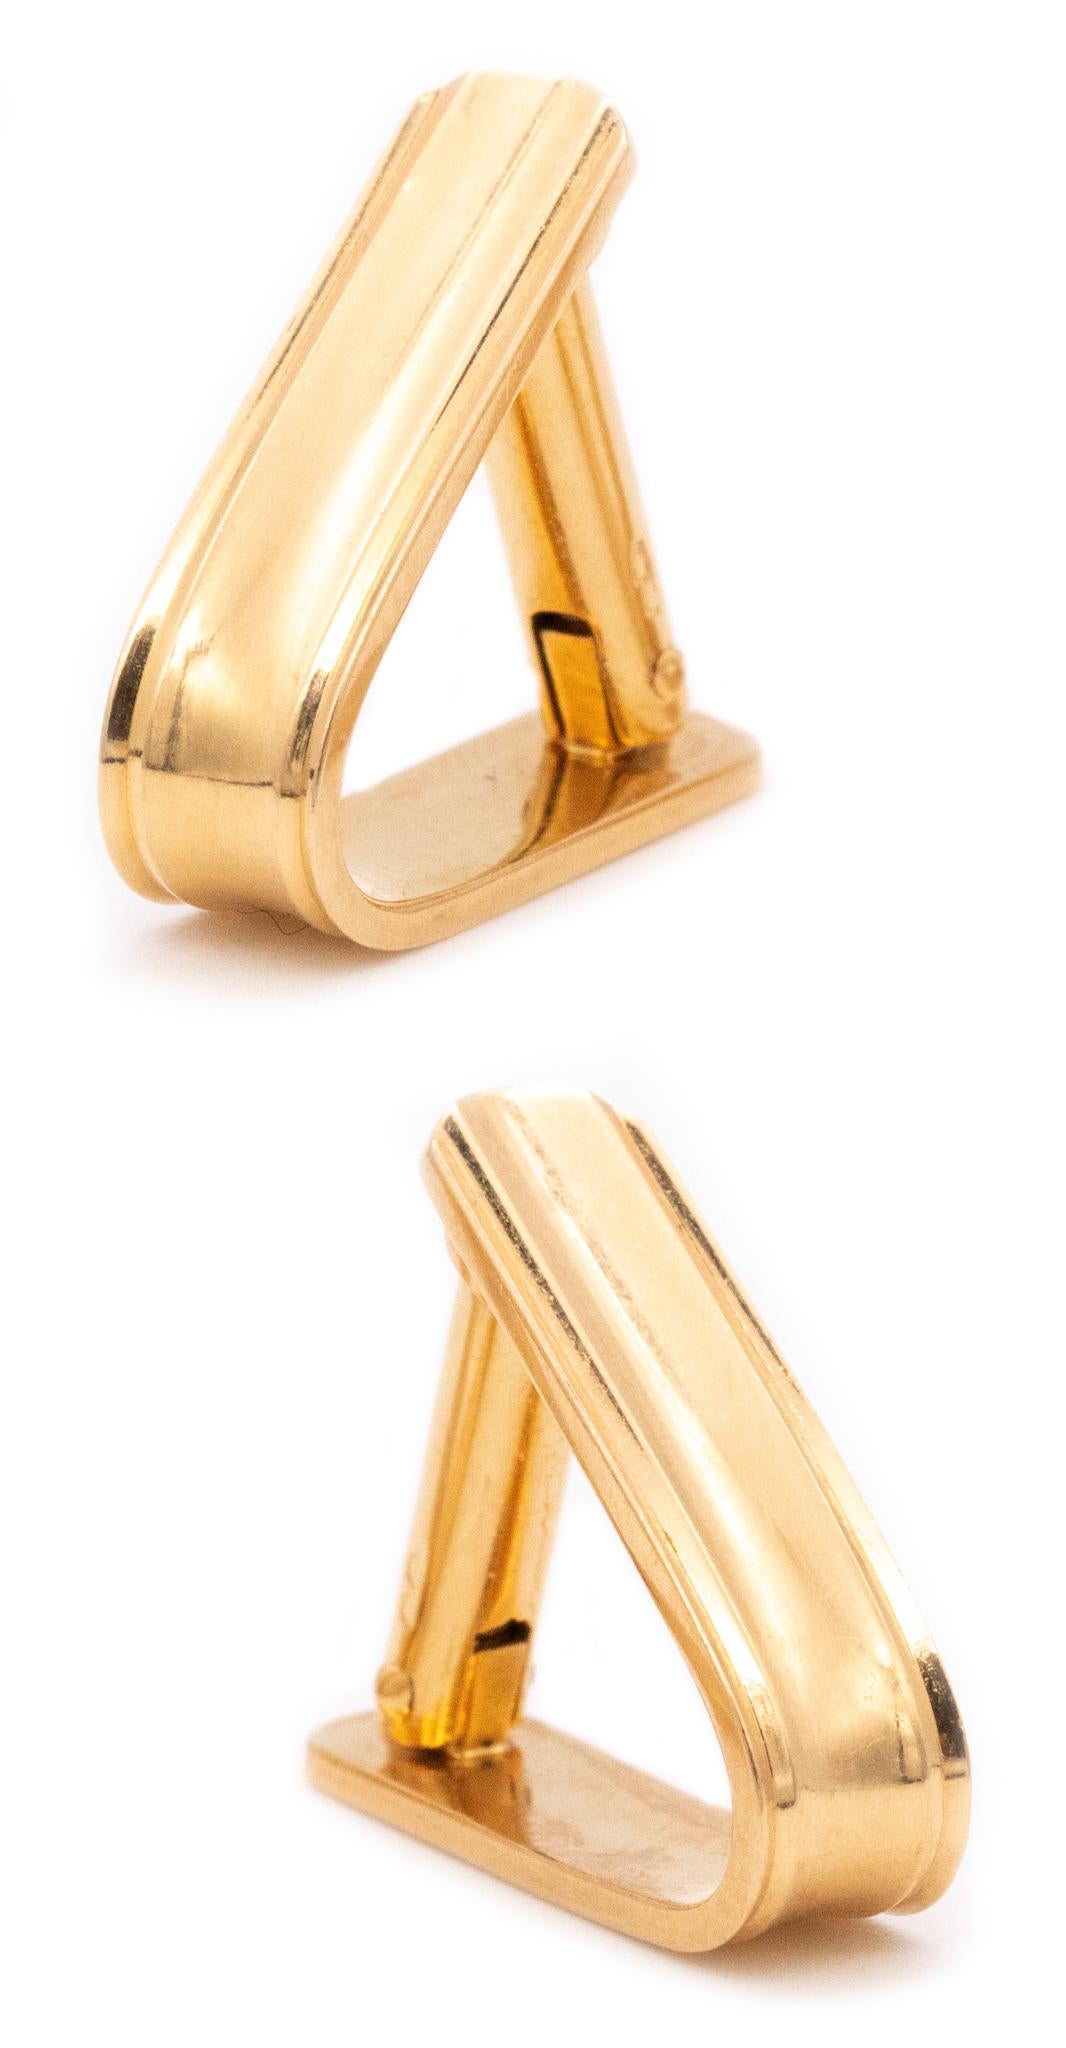 A pair of French stirrup Cufflinks.

Nice V shaped pieces from the French art deco period, probably created during the pre-war period or the beginning back in the 1940's. They are crafted in solid 18 karats of high polished yellow gold and suited